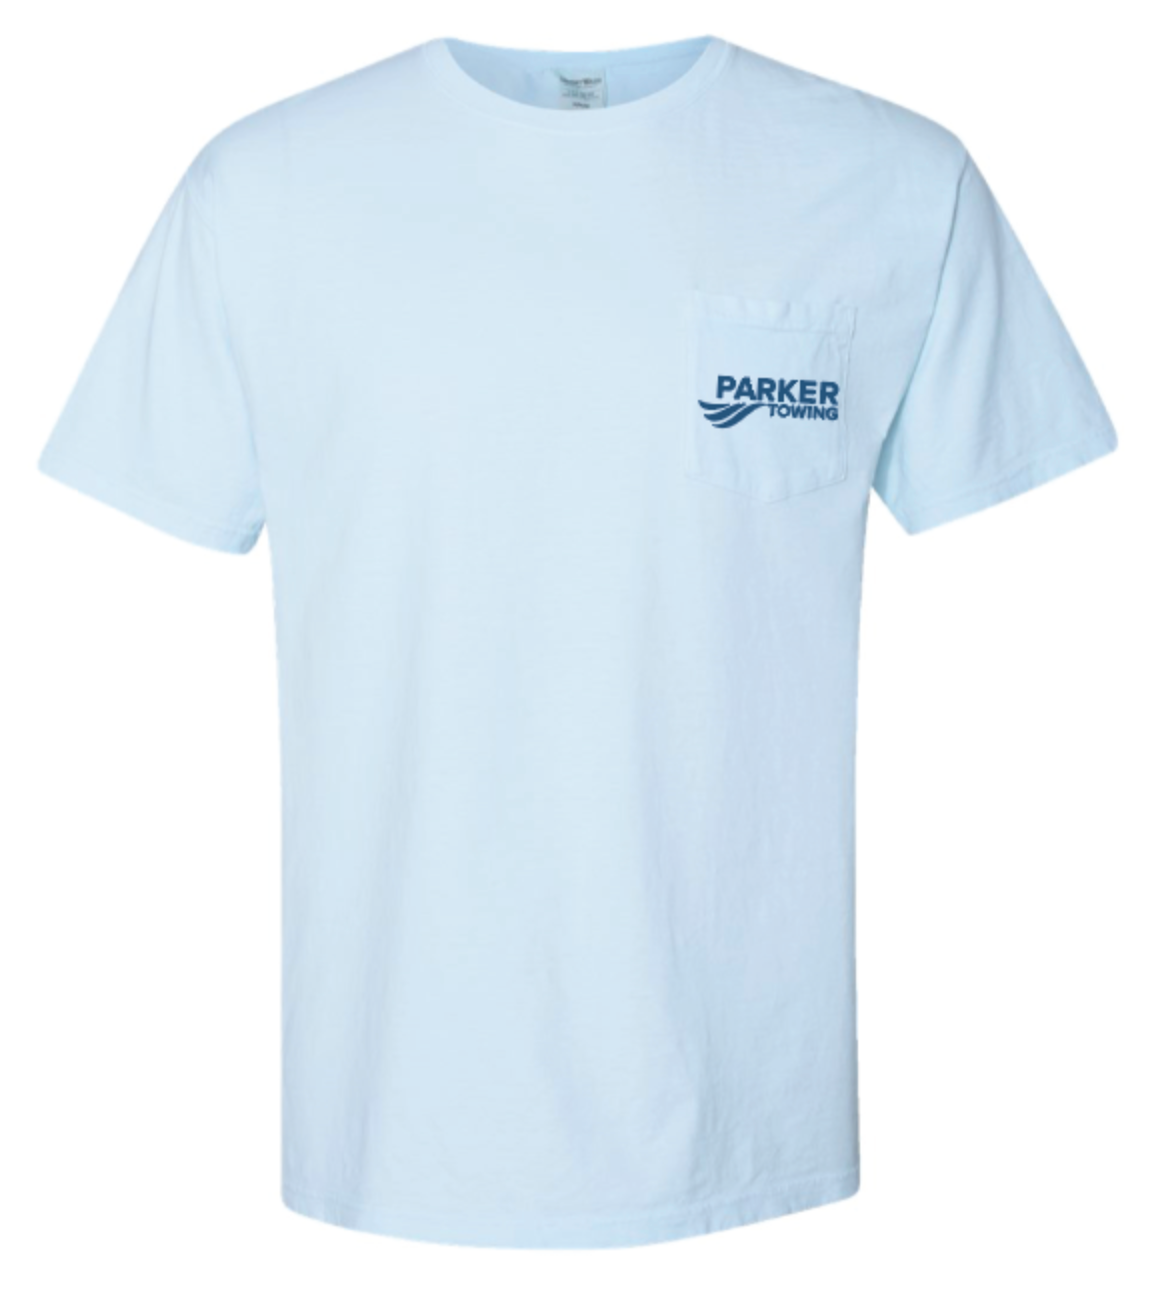 PARKER TOWING COTTON SHORT SLEEVE POCKET TEE